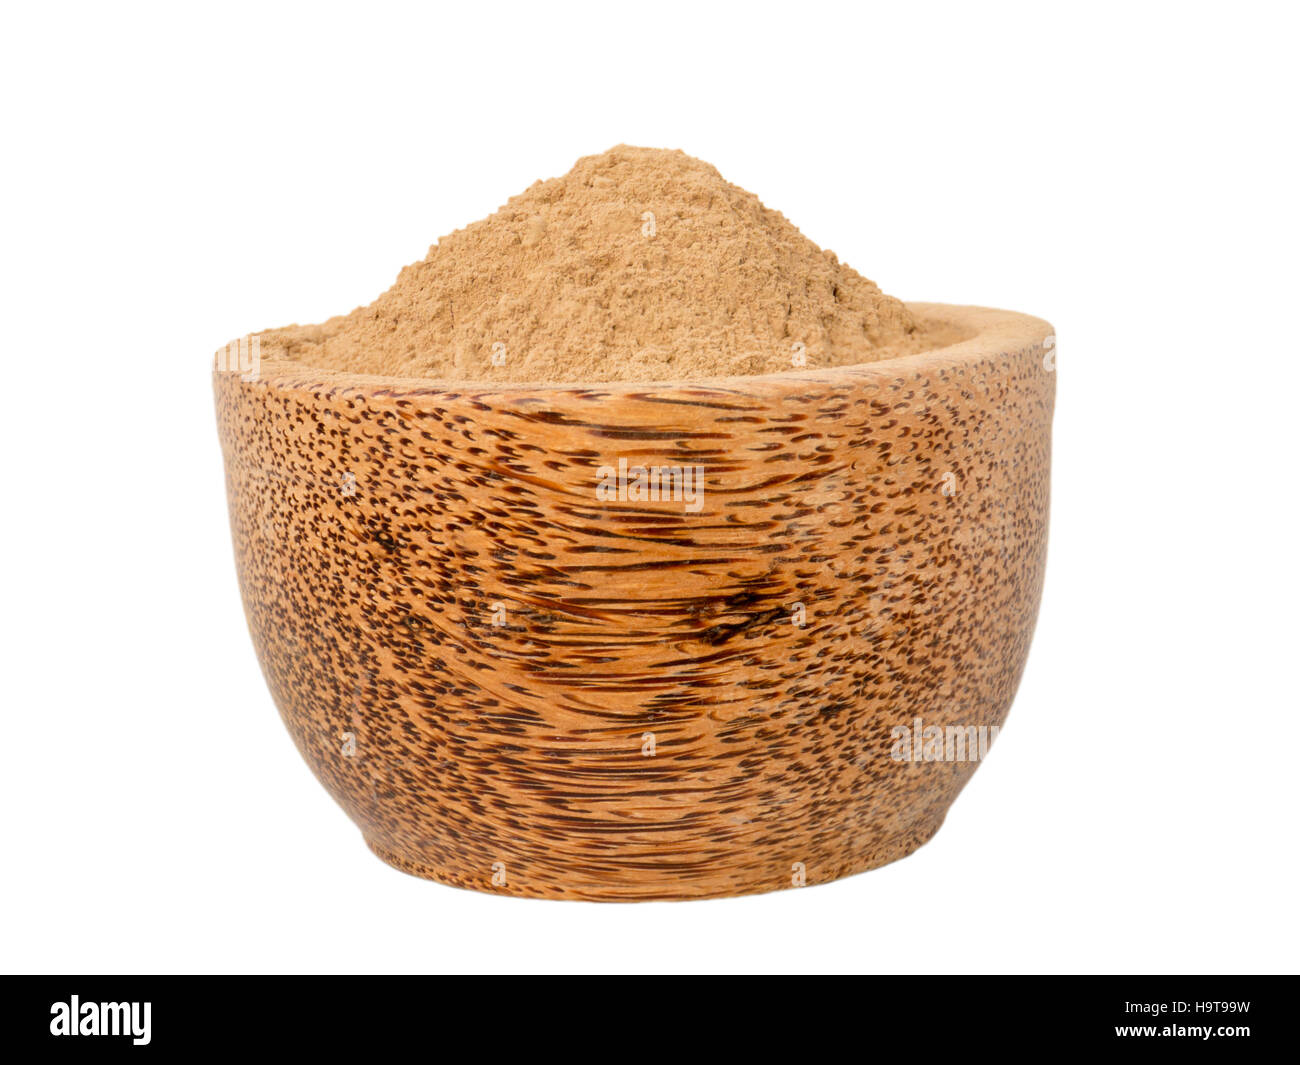 Amalaki emblica officinalis superfood powder in the wooden bowl isolated on white Stock Photo